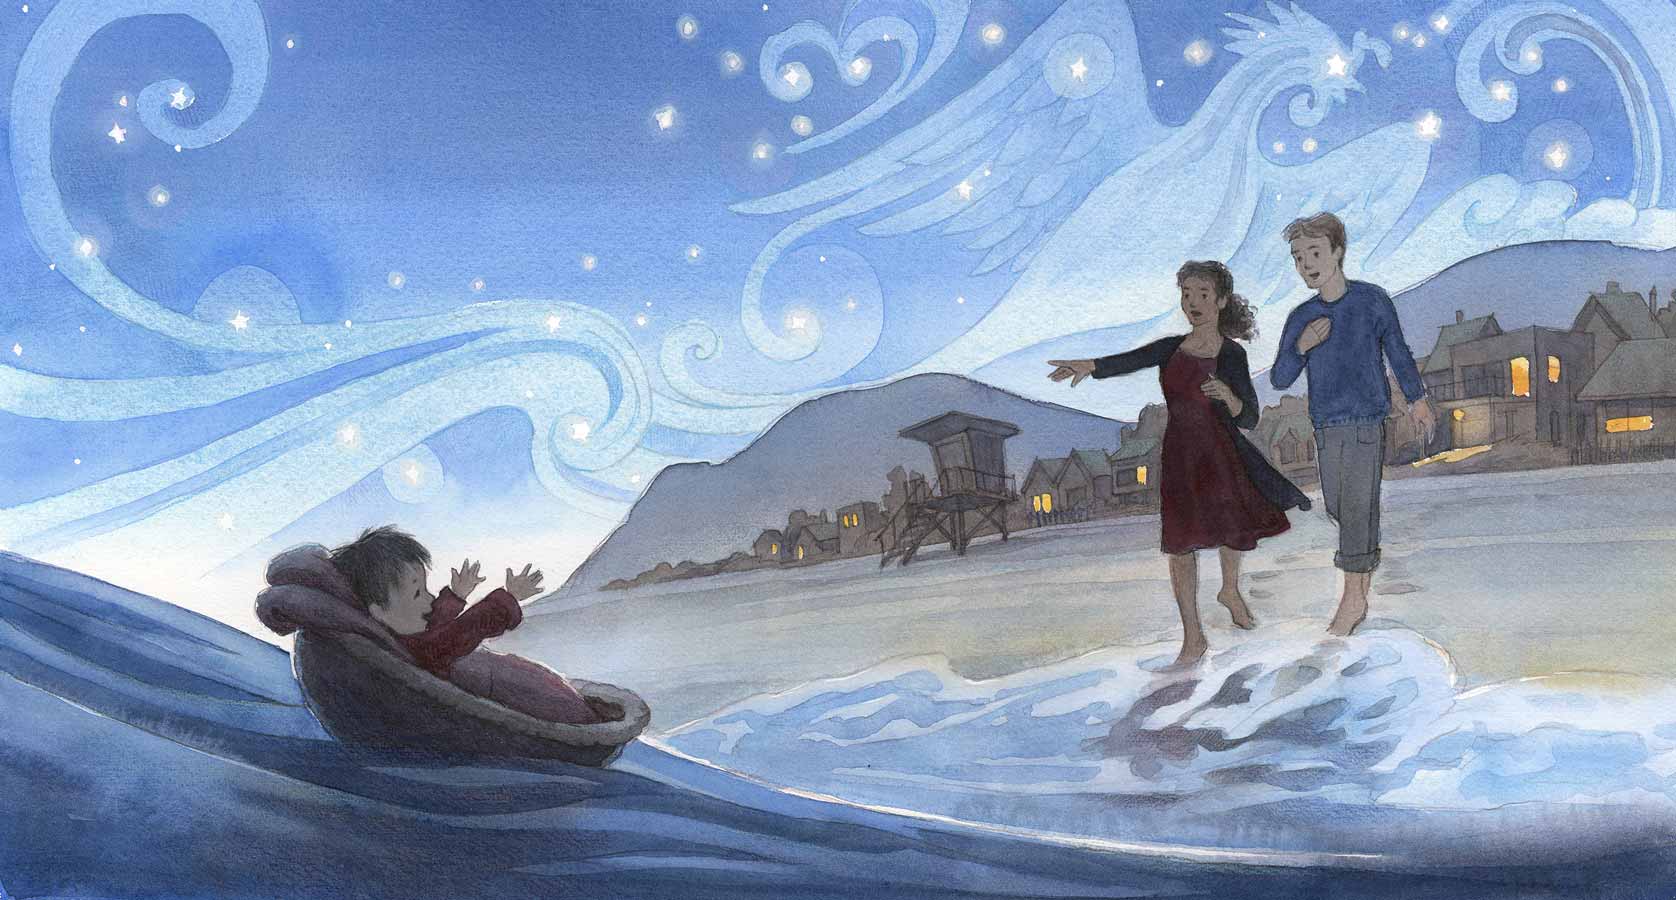 Watercolor illustration of man and woman walking on beach looking at the ocean where a baby is floating in a basket and reaching toward them. In the sky above, swirls and stars form the shape of a phoenix.